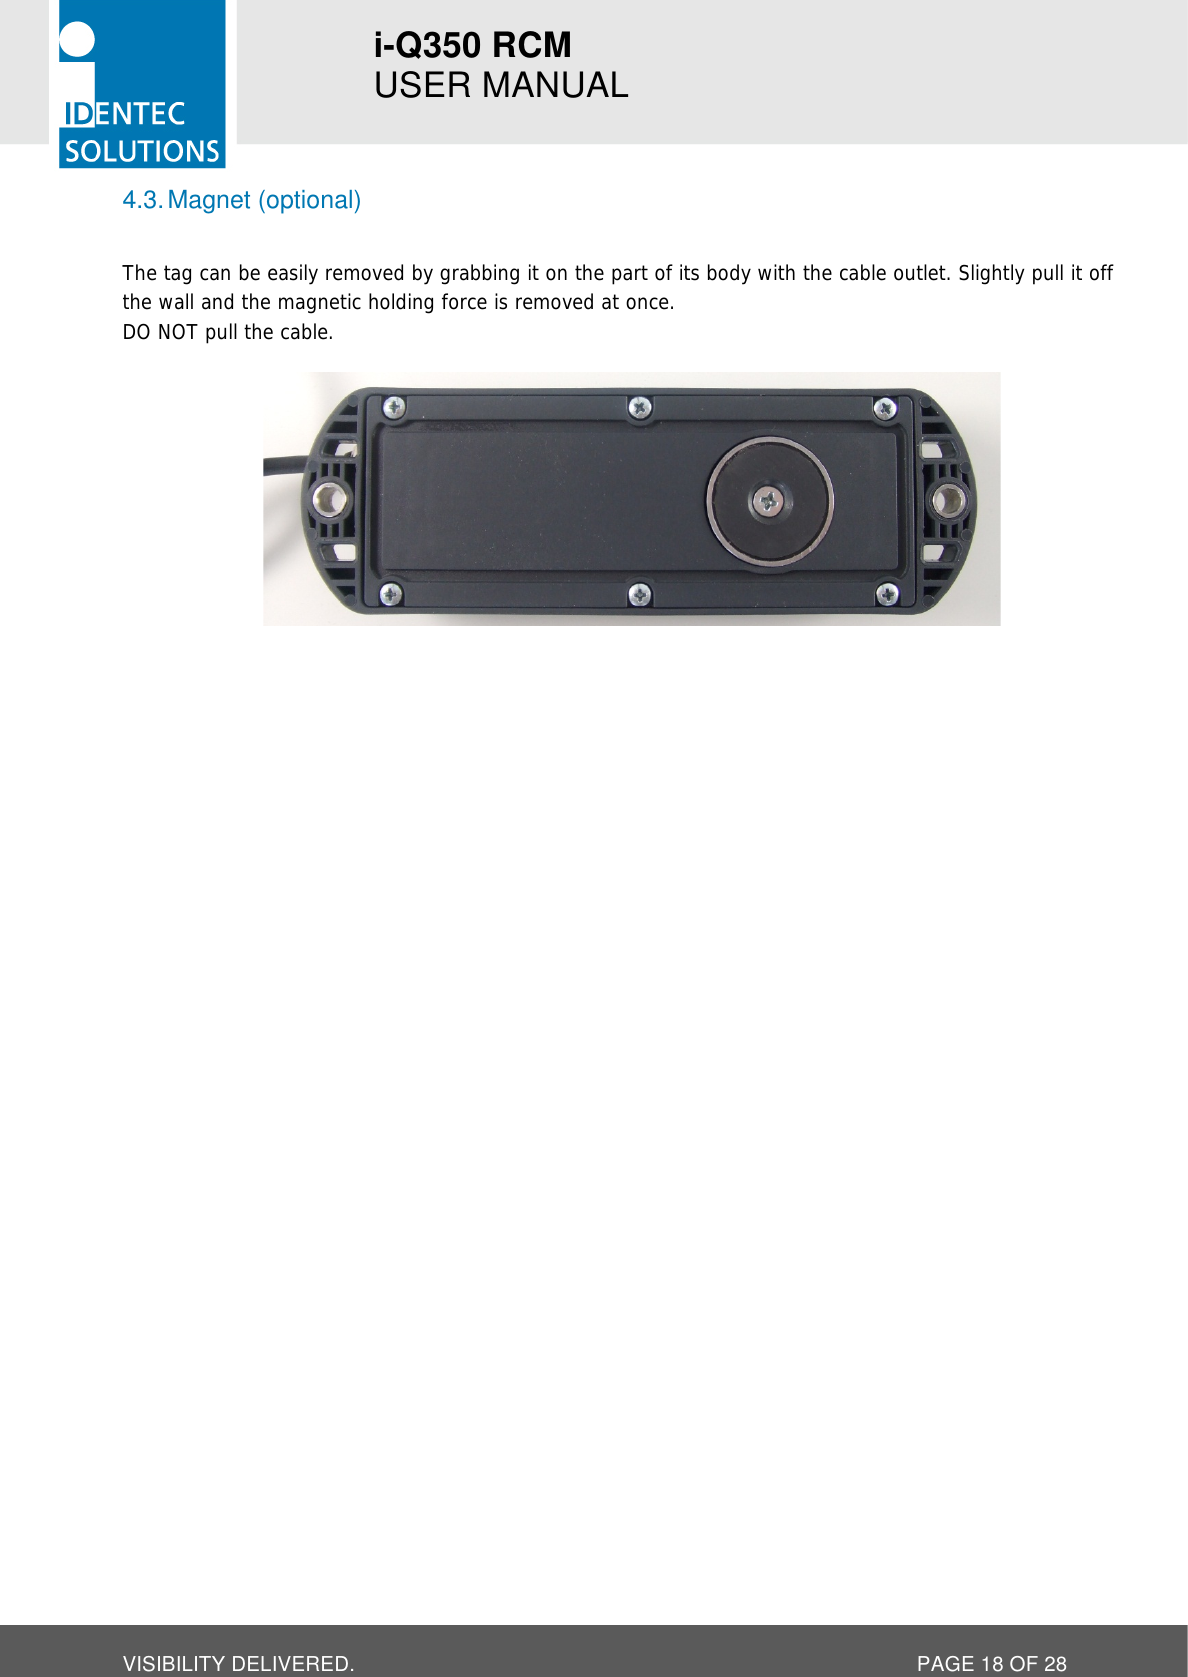 i-Q350 RCM   USER MANUAL  VISIBILITY DELIVERED.  PAGE 18 OF 28 4.3. Magnet (optional)  The tag can be easily removed by grabbing it on the part of its body with the cable outlet. Slightly pull it off the wall and the magnetic holding force is removed at once. DO NOT pull the cable.      